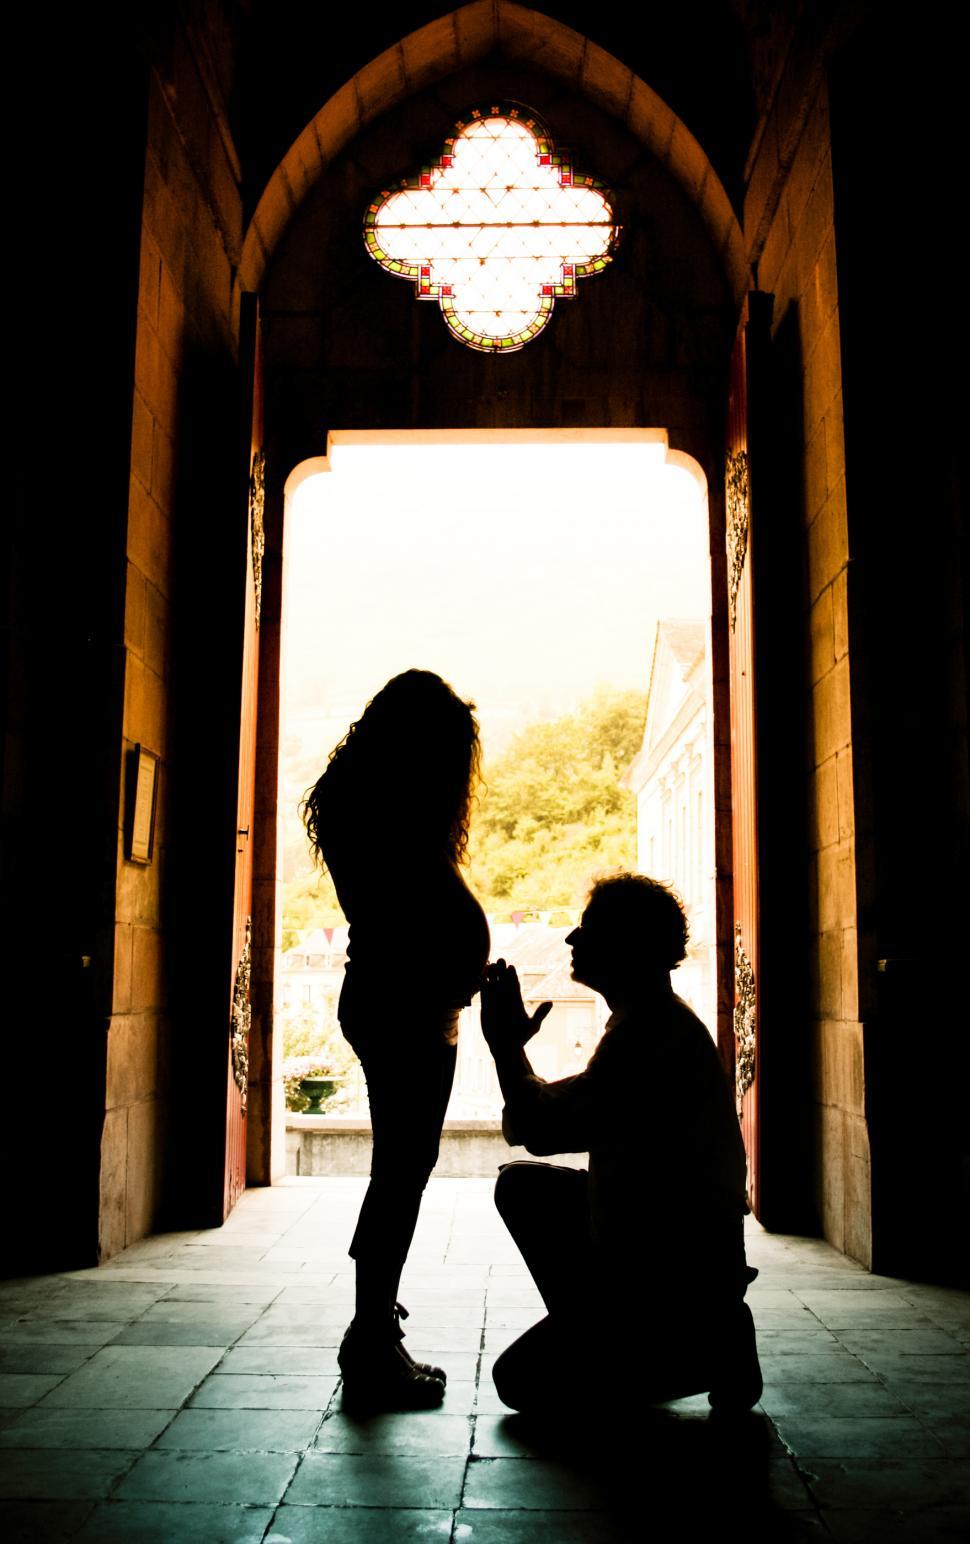 Free Image of Pregnant woman proposal 